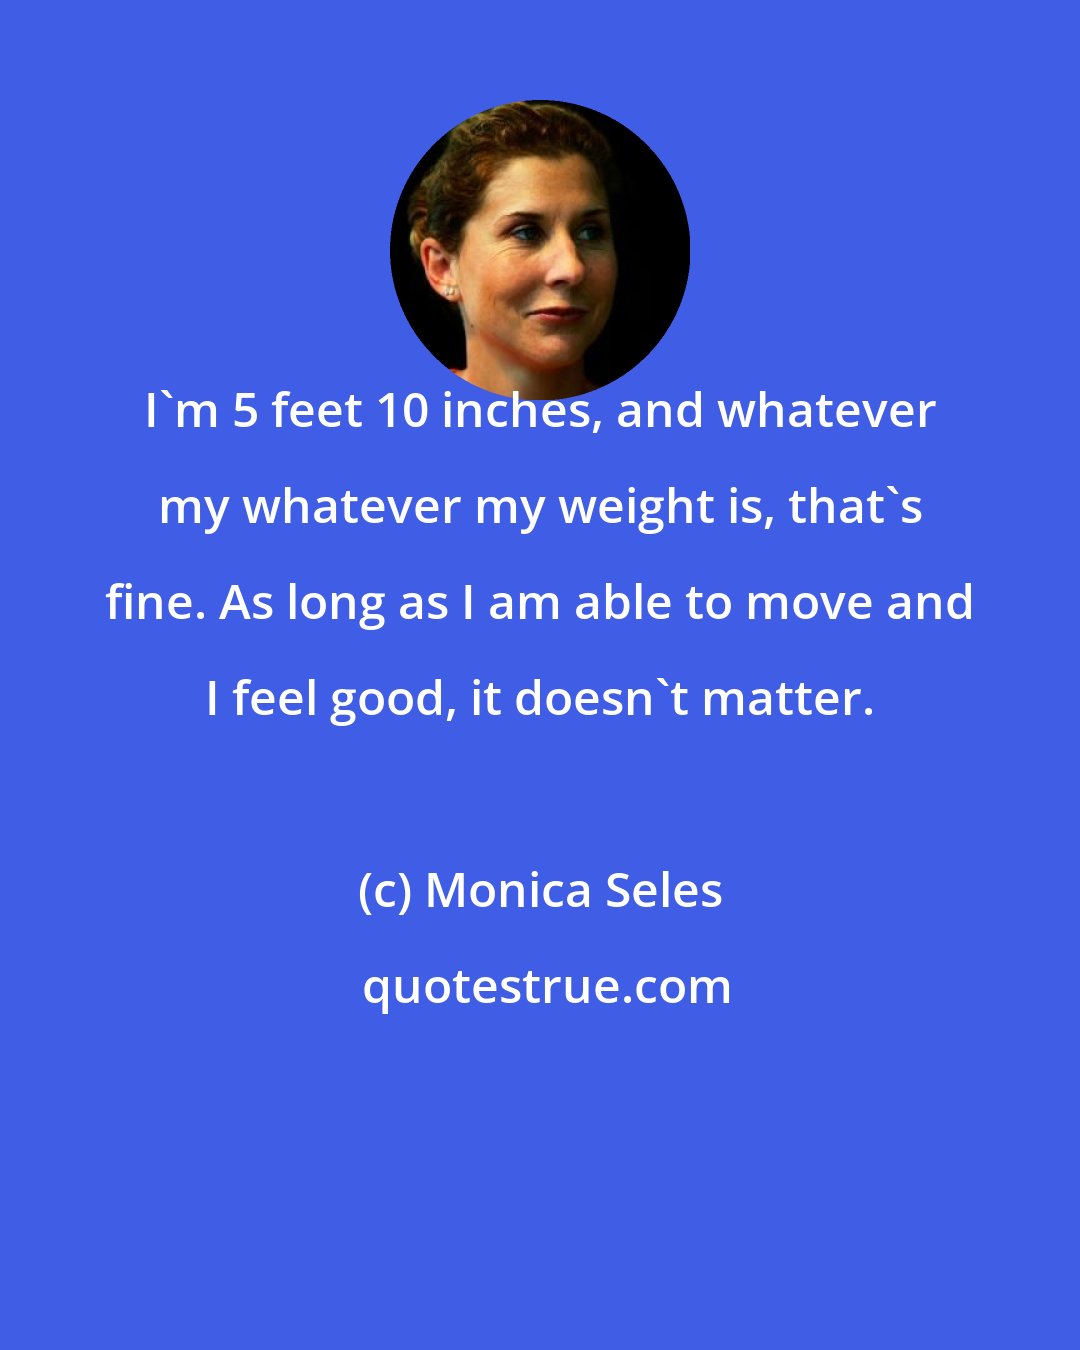 Monica Seles: I'm 5 feet 10 inches, and whatever my whatever my weight is, that's fine. As long as I am able to move and I feel good, it doesn't matter.